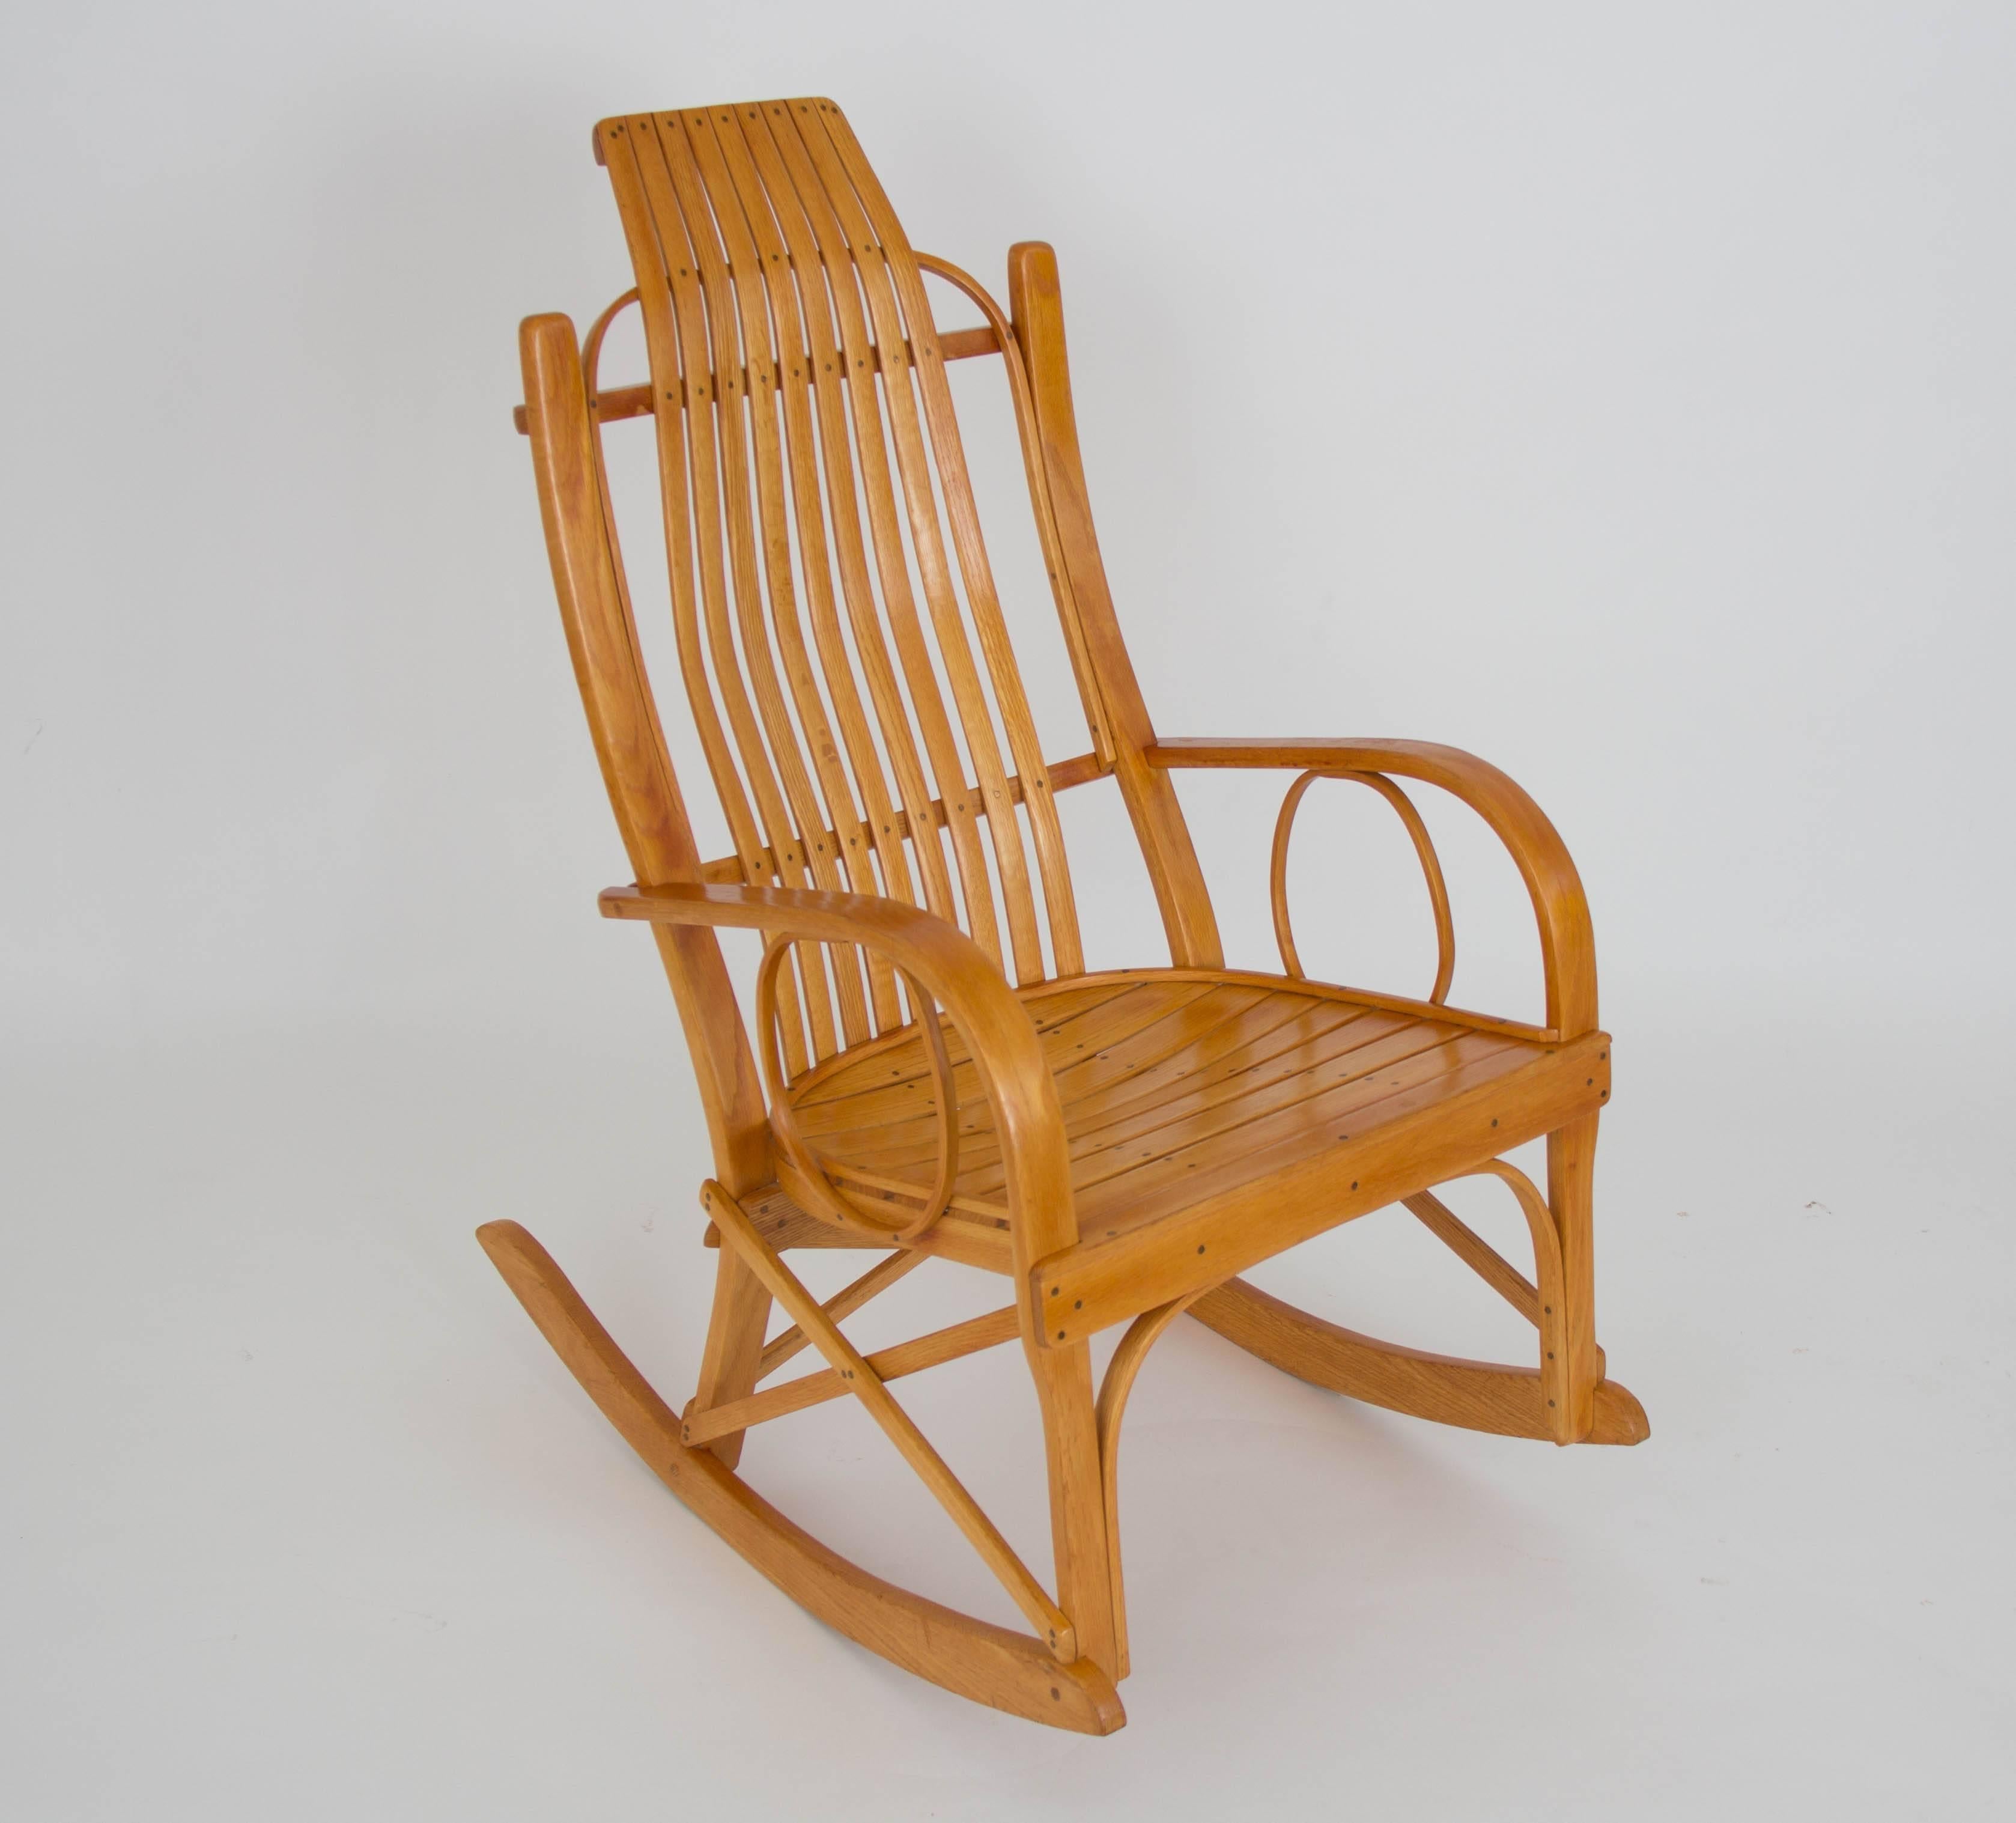 A handcrafted rocking chair in the style of Amish bentwood pieces. This example is made of oak slats laid close together to form the seat and backrest, and concentric runners of bent oak that form the arms and rockers. A small notation beneath the